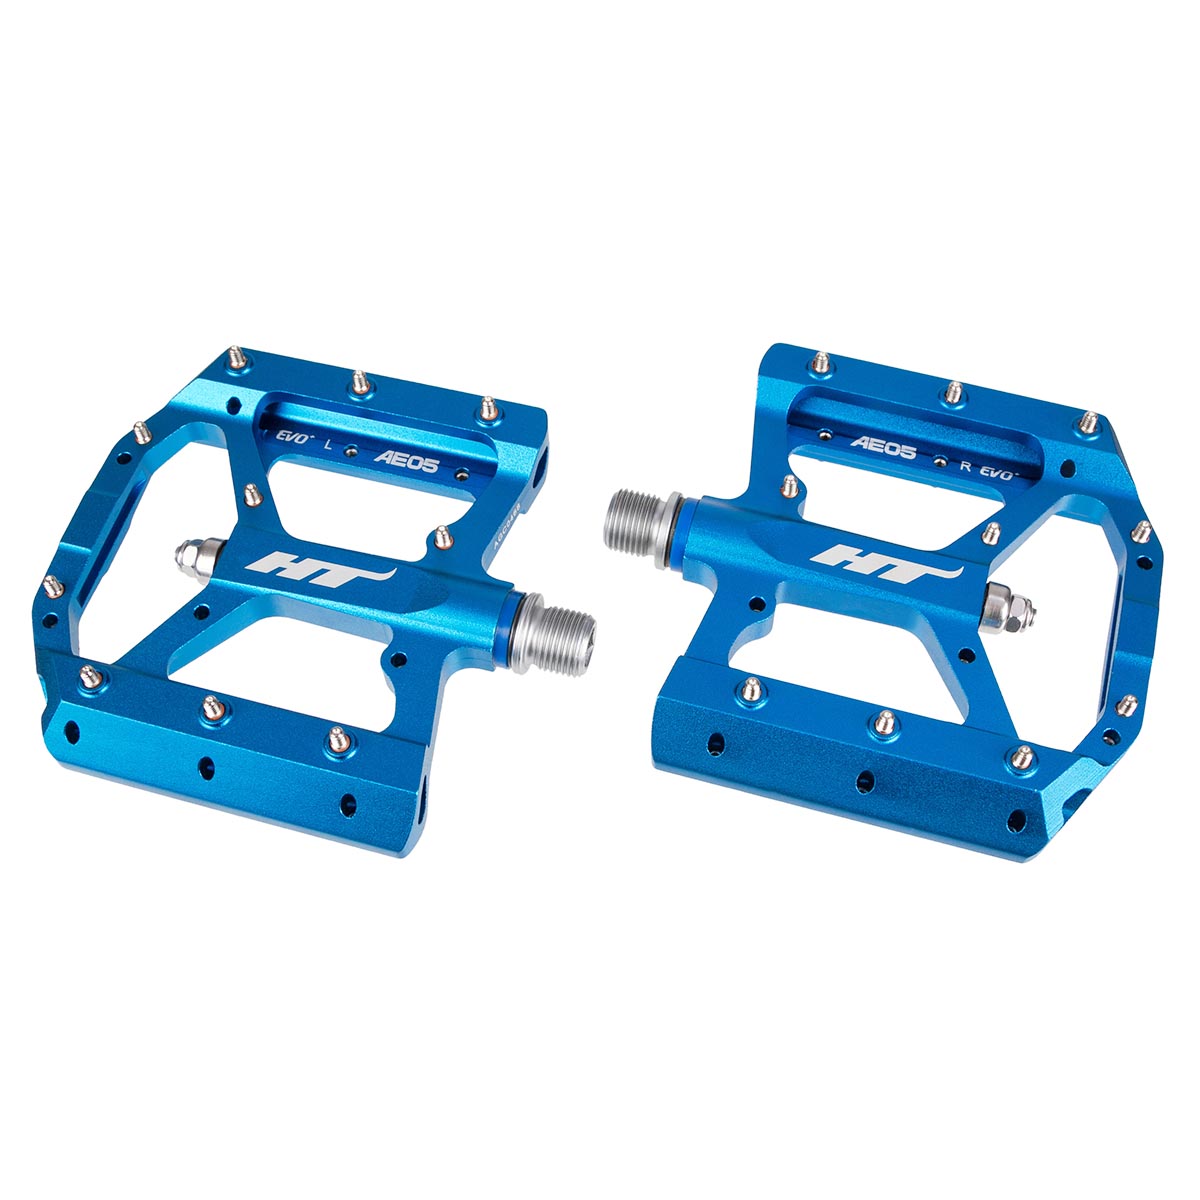 HT Components Pedals AE05 Marine Blue